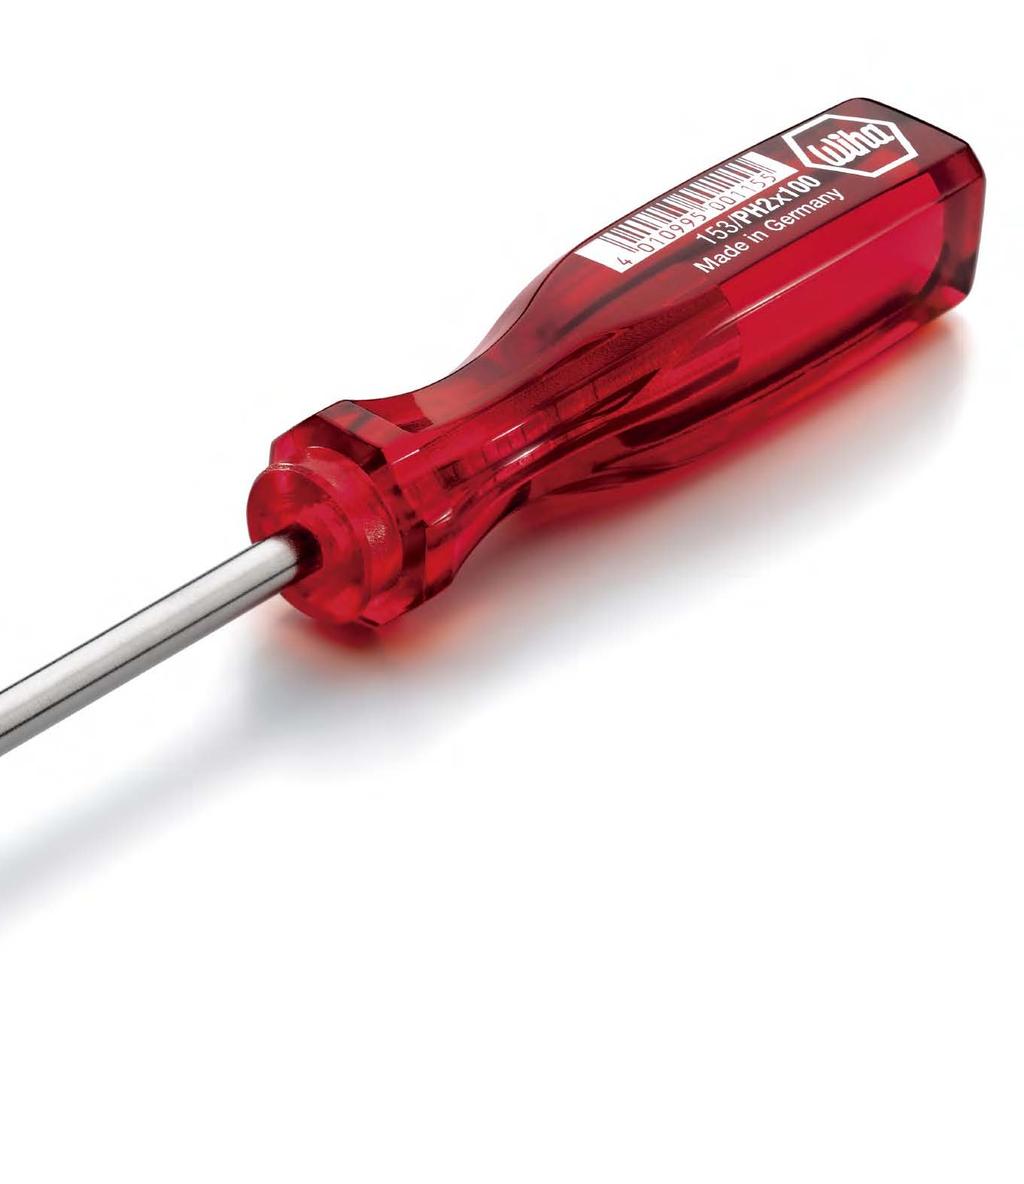 Wiha Classic. The robust screwdriver for multiple applications. For slotted screws. For Phillips, Pozidriv and TORX screws.